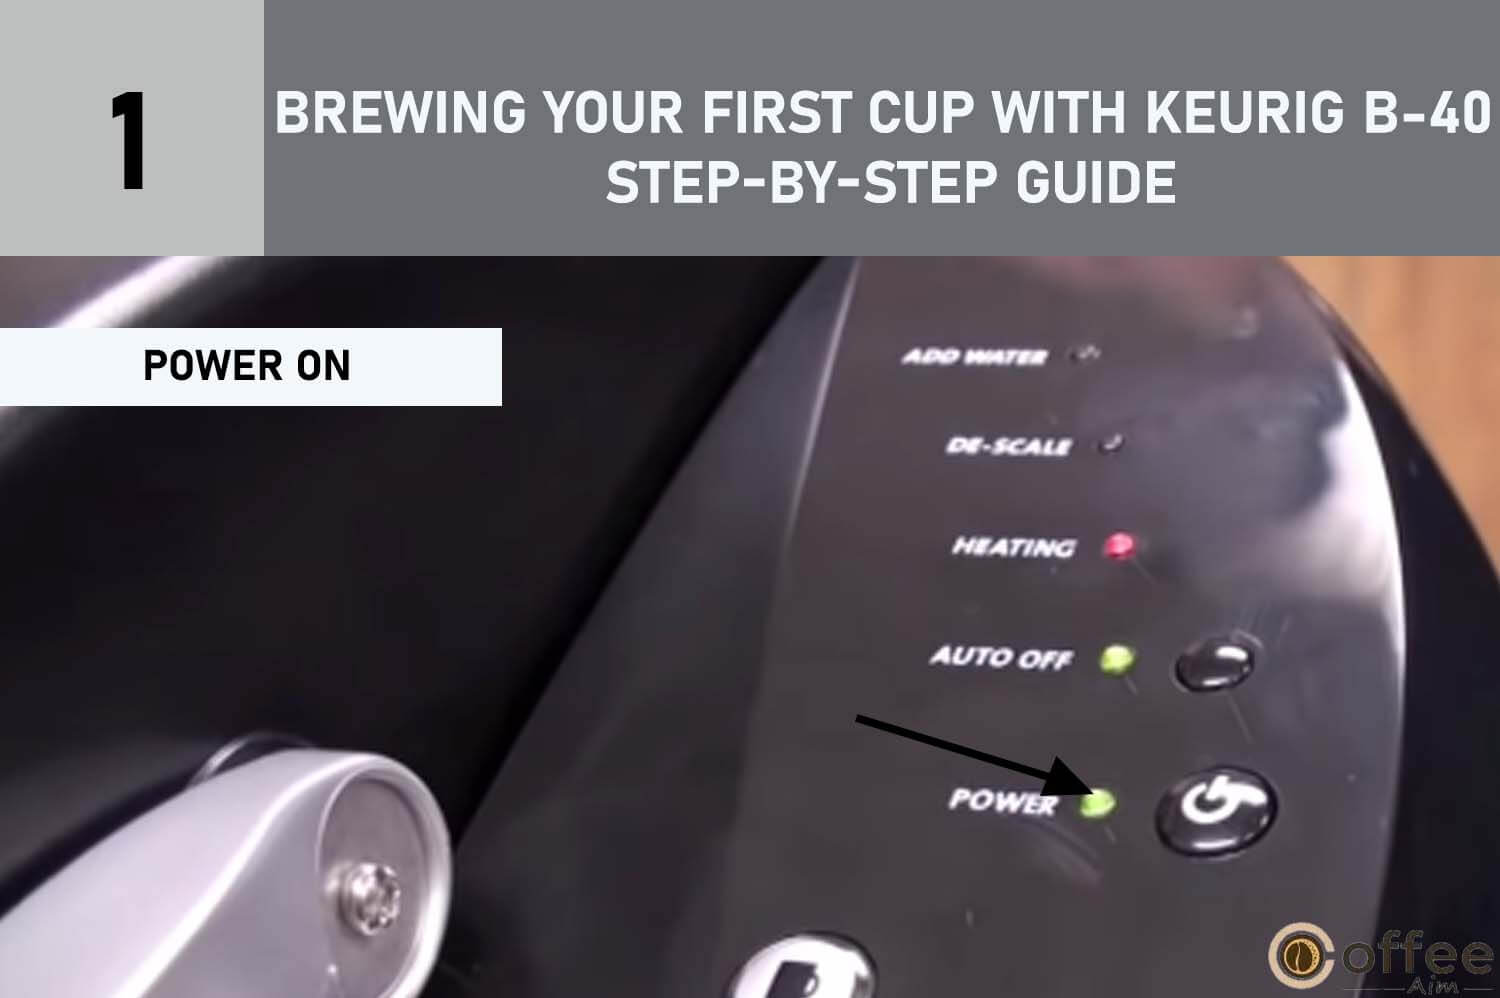 The provided image illustrates the process of "Powering On" as outlined in the comprehensive guide "Brewing Your First Cup with Keurig B-40: A Step-by-Step Guide" featured within the article "How to Use the Keurig B-40." This visual depiction effectively elucidates the initial step of activating the Keurig B-40 Brewer, setting the stage for a seamless brewing experience